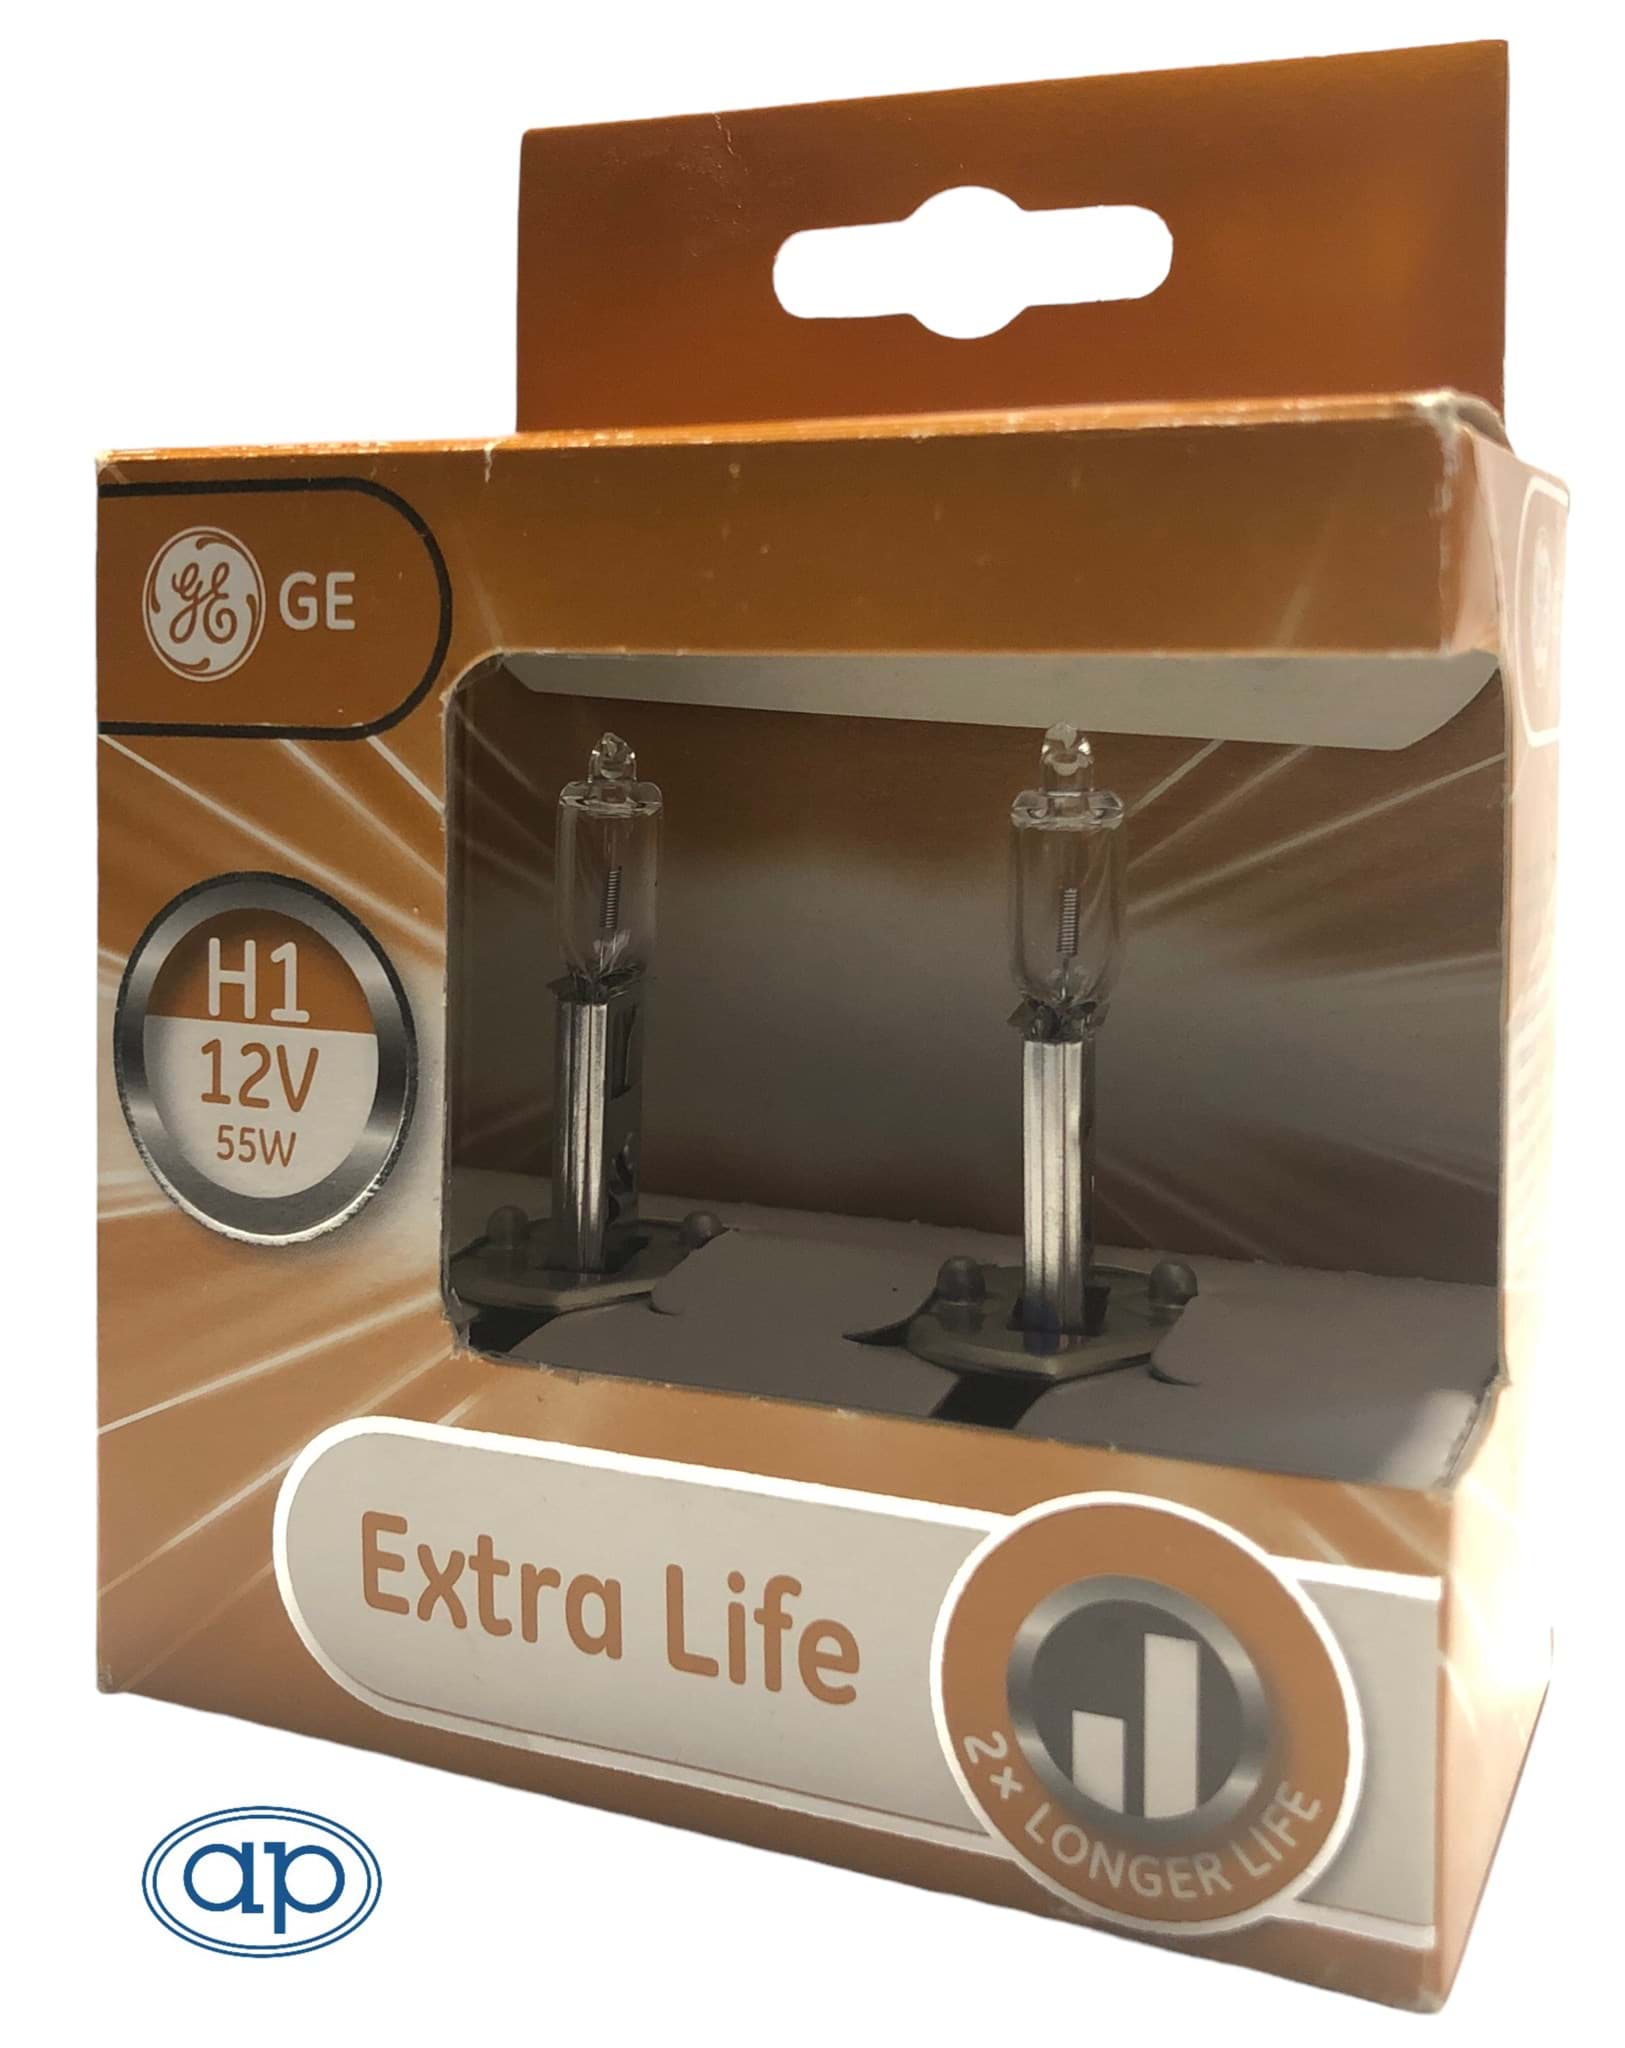 Immagine di GE Extra Life H1 12V 55W  HD LL  Lampe General Electric Halogenlampe Doppelpackung - 2er Set | Abverkauf